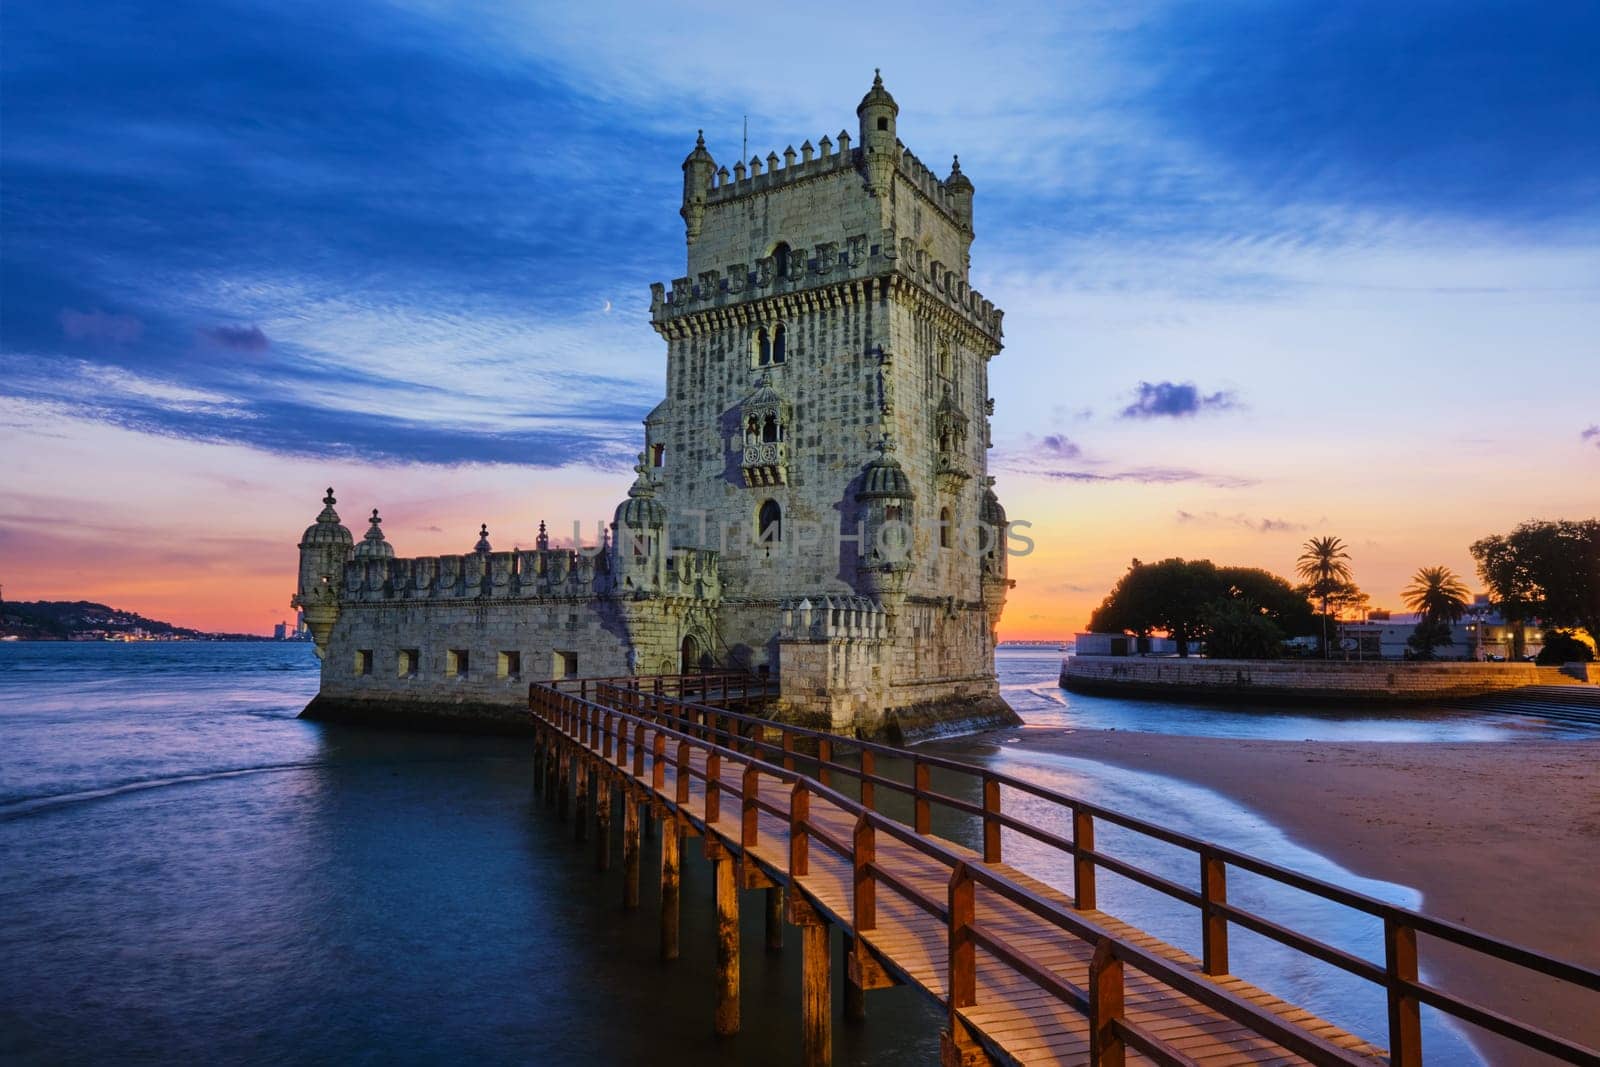 Belem Tower on the bank of the Tagus River in dusk after sunset. Lisbon, Portugal by dimol